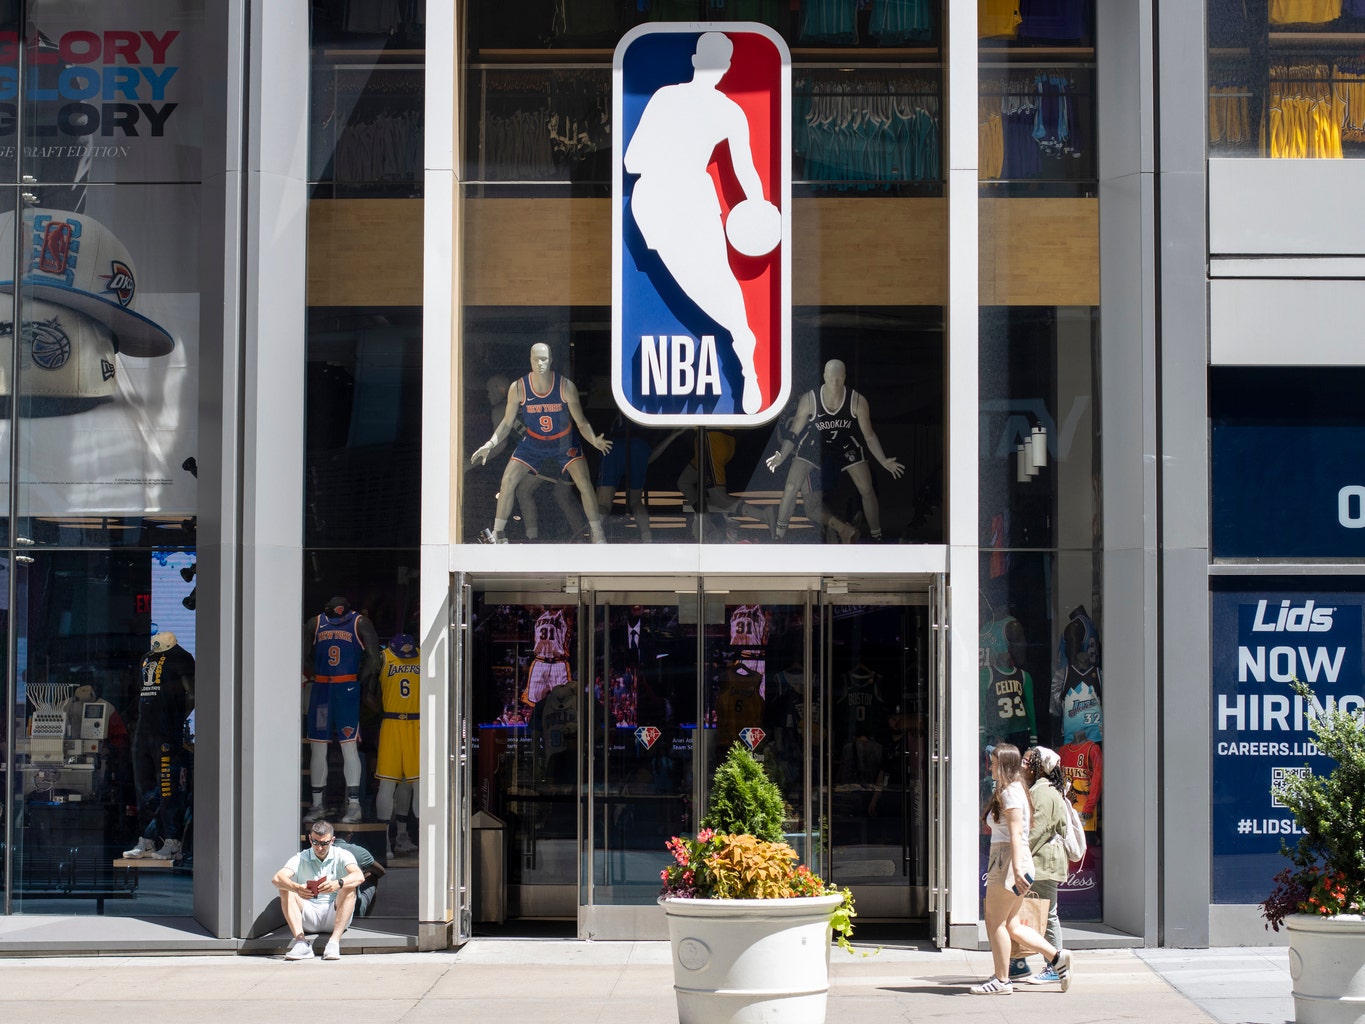 6 Streaming Platforms The NBA Could Look To For New Rights Deal